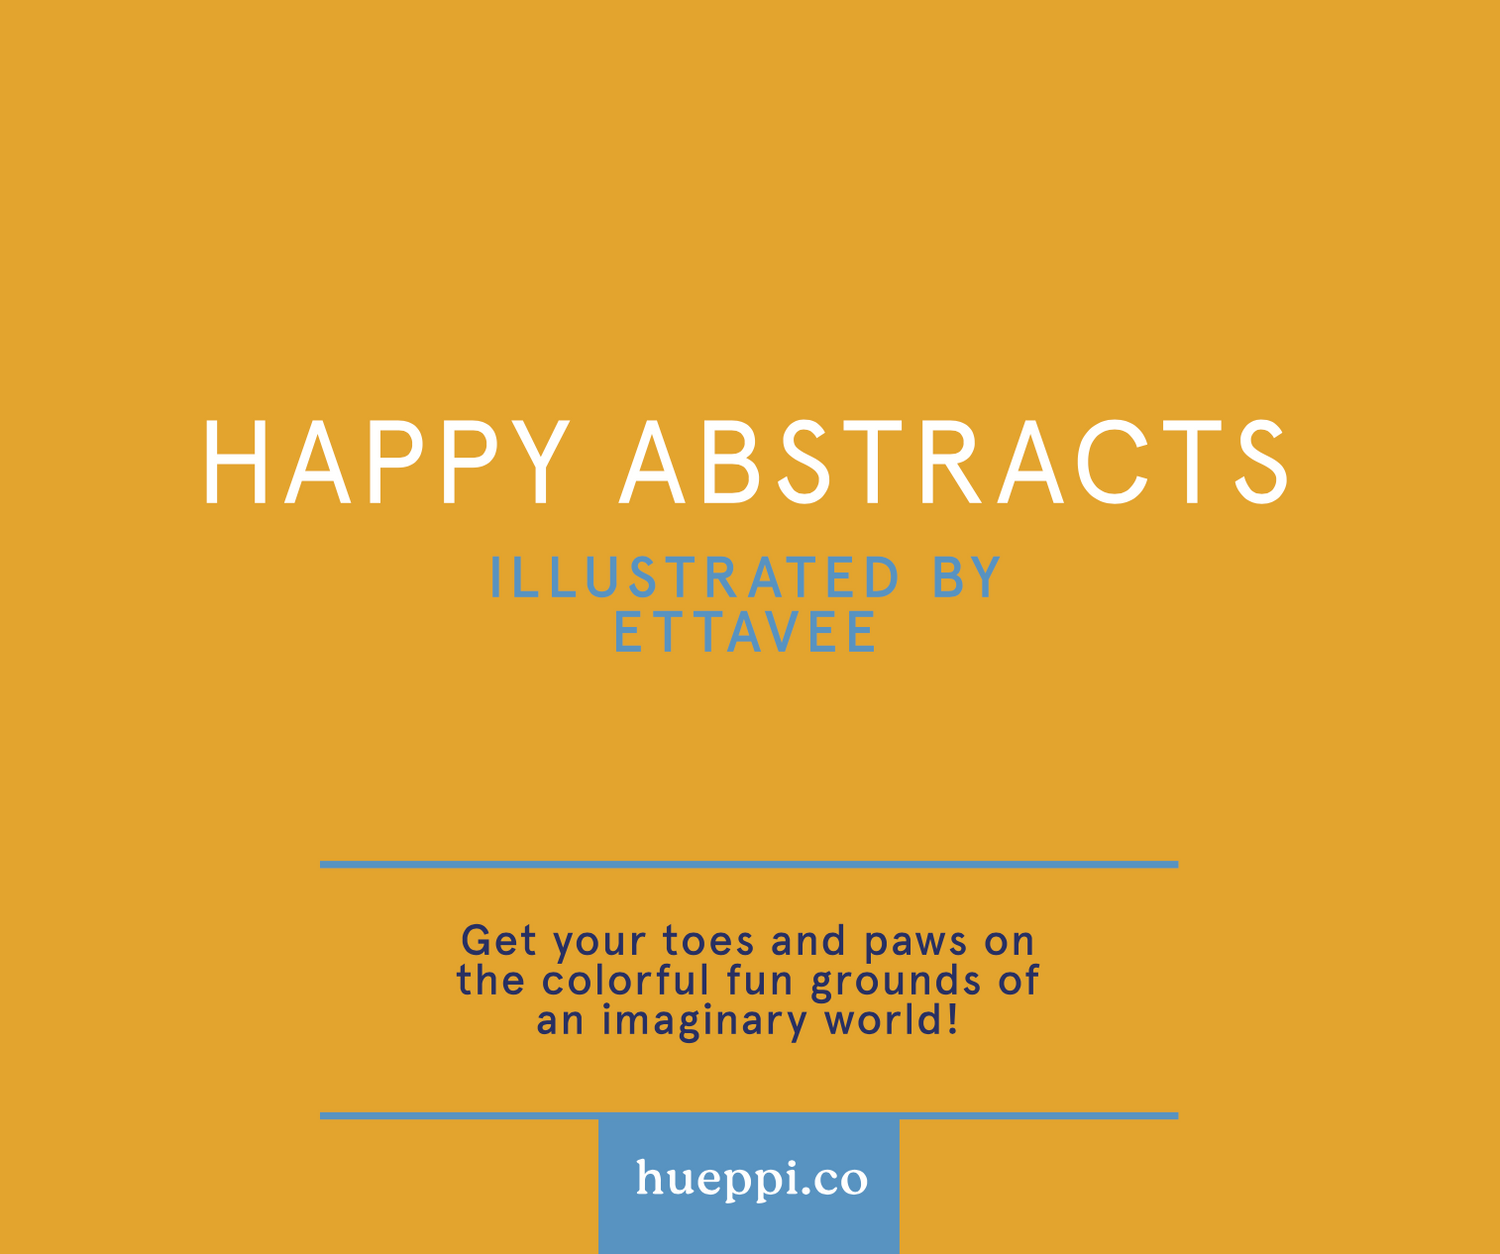 Happy Abstracts by EttaVee